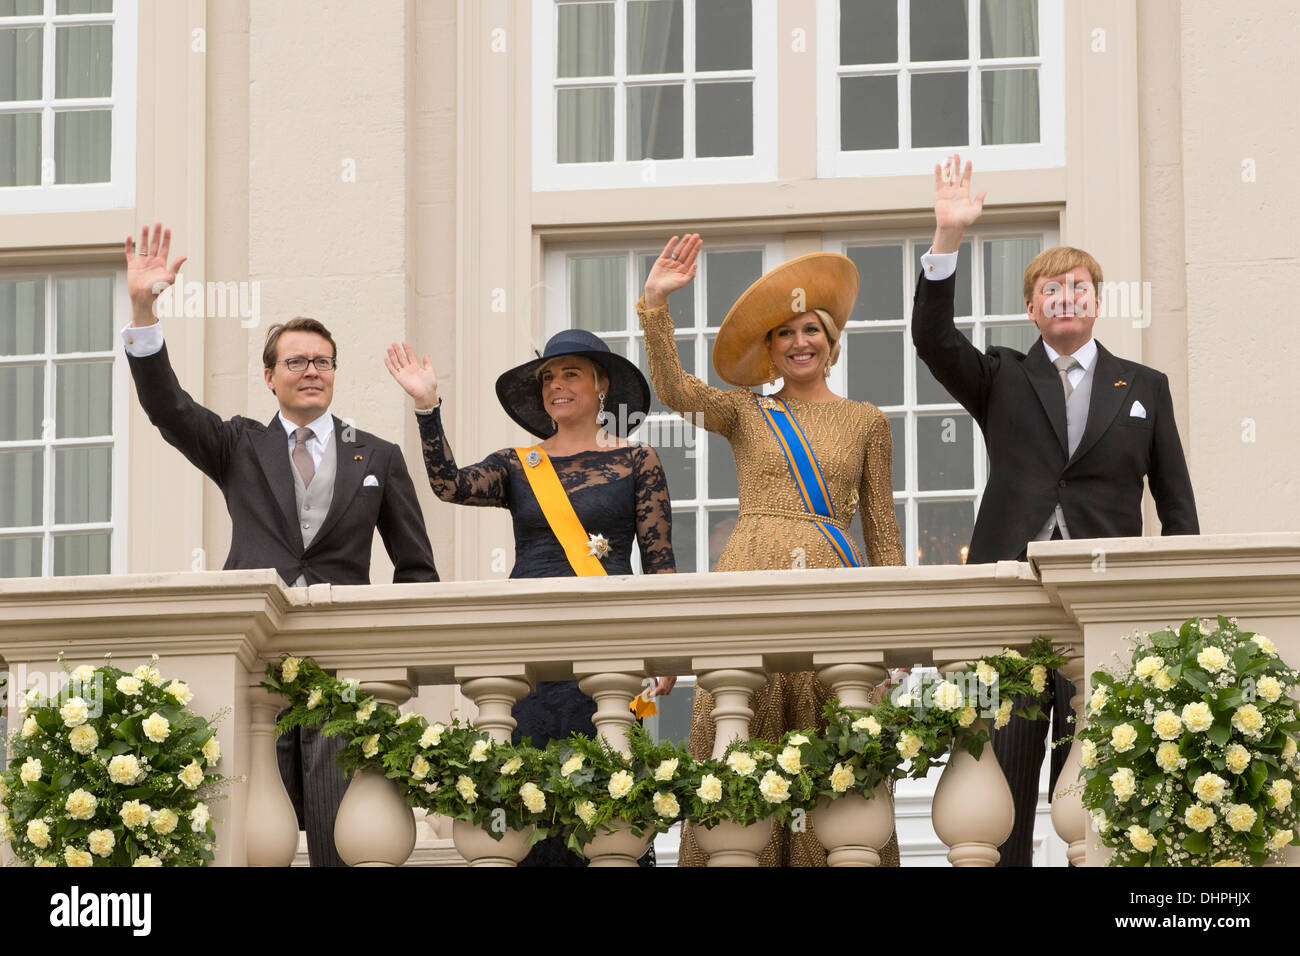 Netherlands, The Hague, Royal family greeting the public from the balcony of palace called Noordeinde. Stock Photo